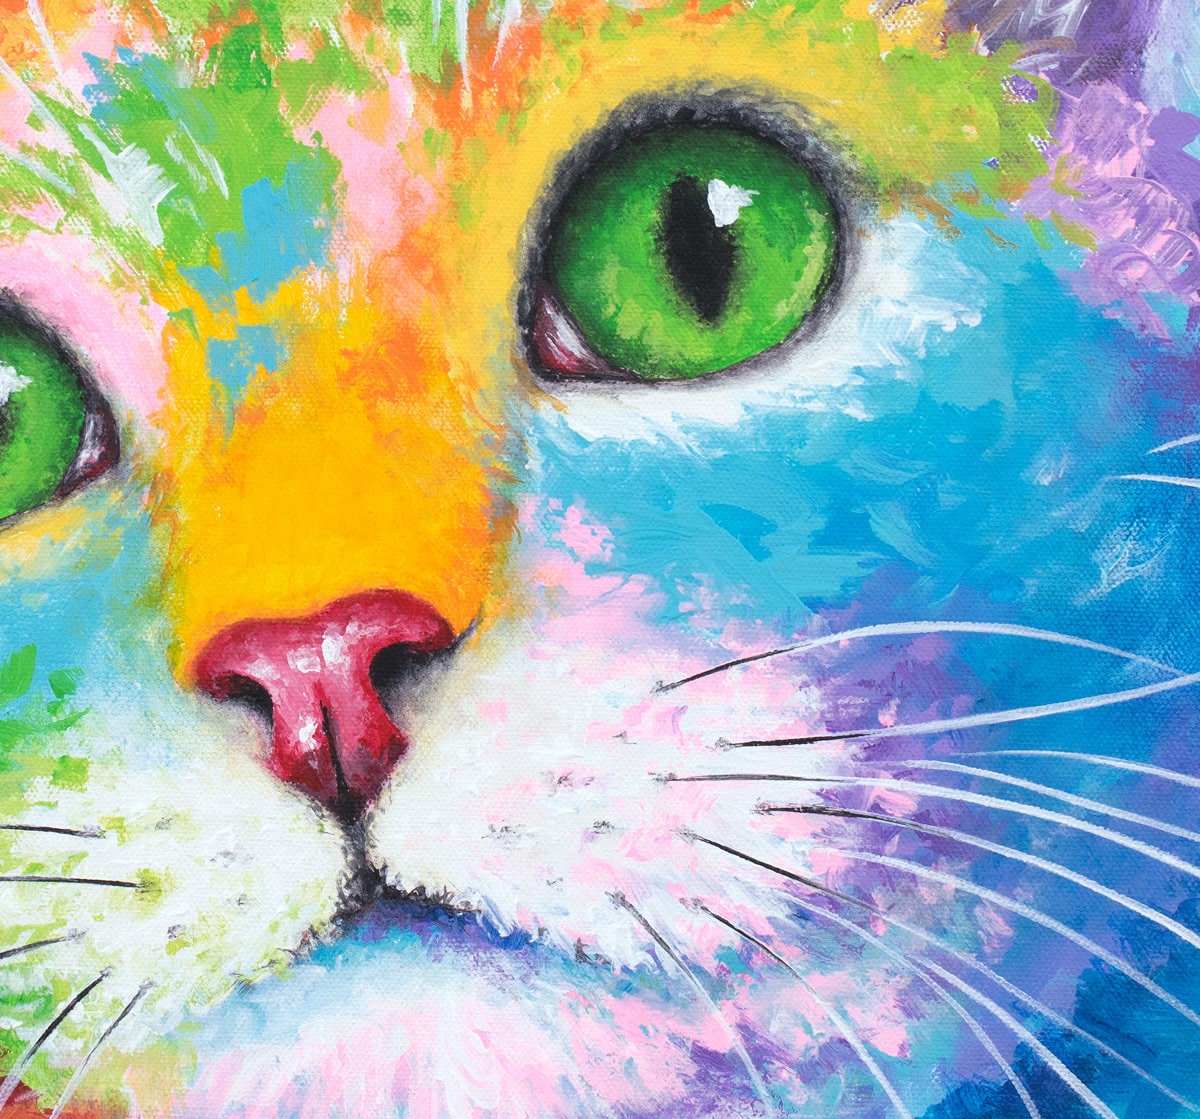 Rainbow Cat Print - Beautiful Cat Painting. Psychedelic Cat Art on CANVAS or PAPER. "Kitty with Green Eyes" by Krystle Cole